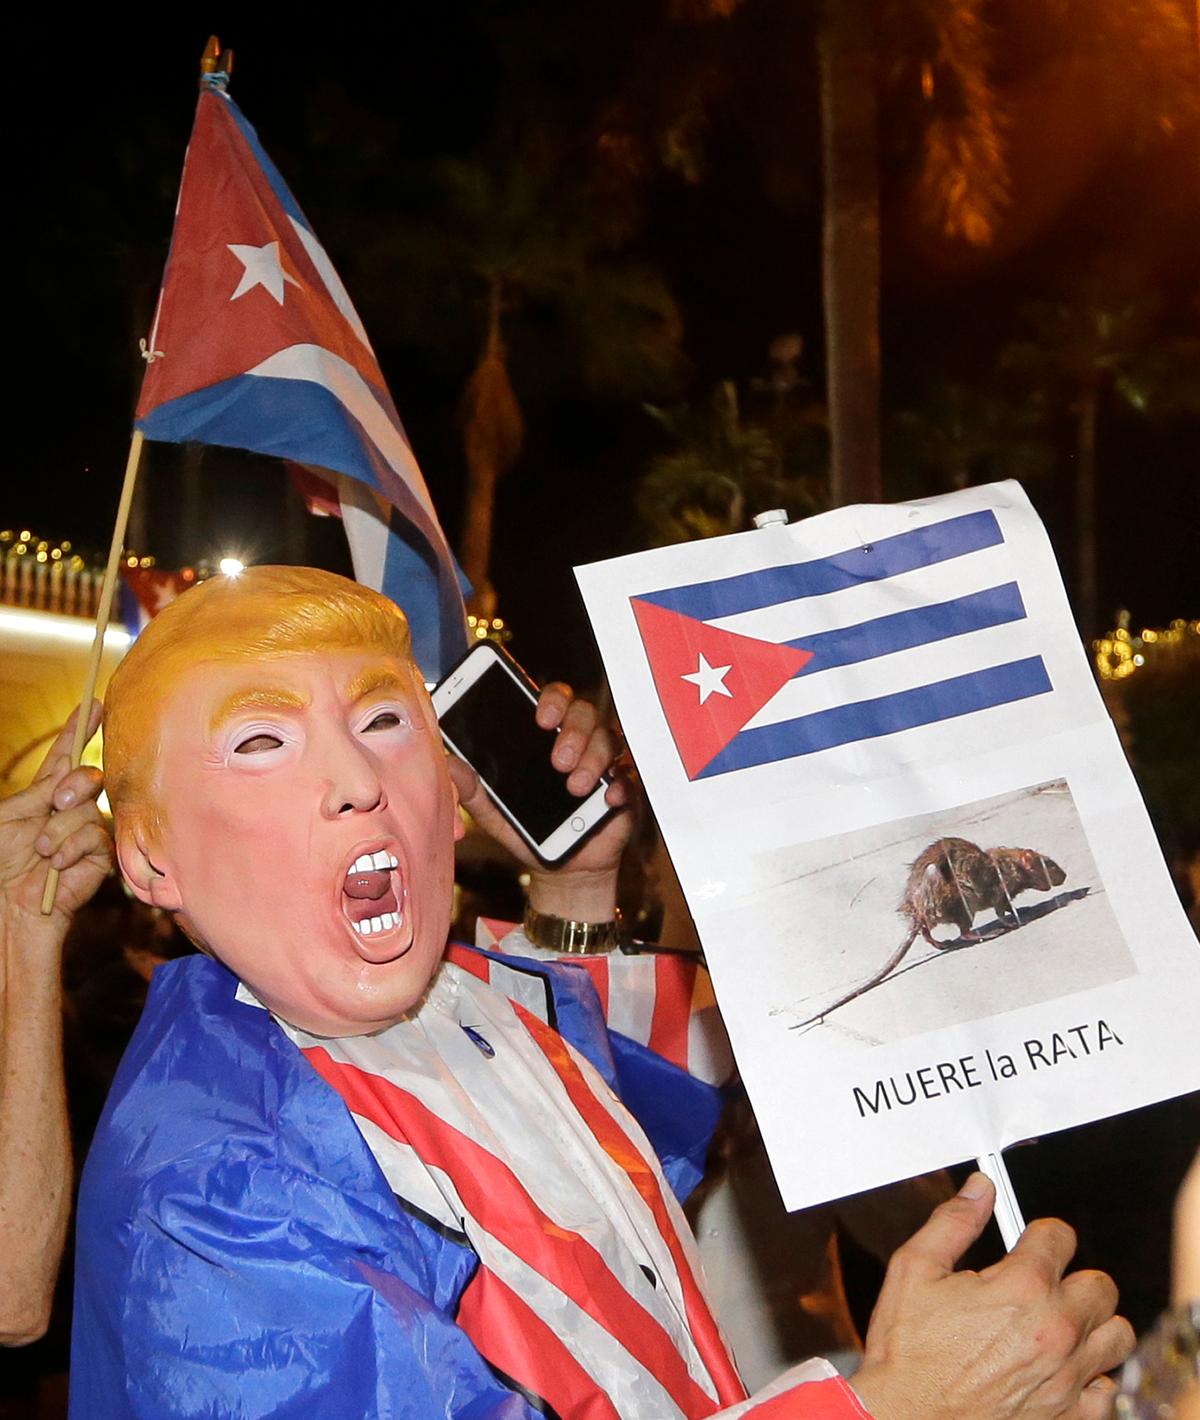 A person wearing a Donald Trump mask holds a sign in Spanish that reads the Rat Dies as he celebrates the death of Fidel Castro in the Little Havana area in Miami., on Nov. 26, 2016. (AP Photo/Alan Diaz)